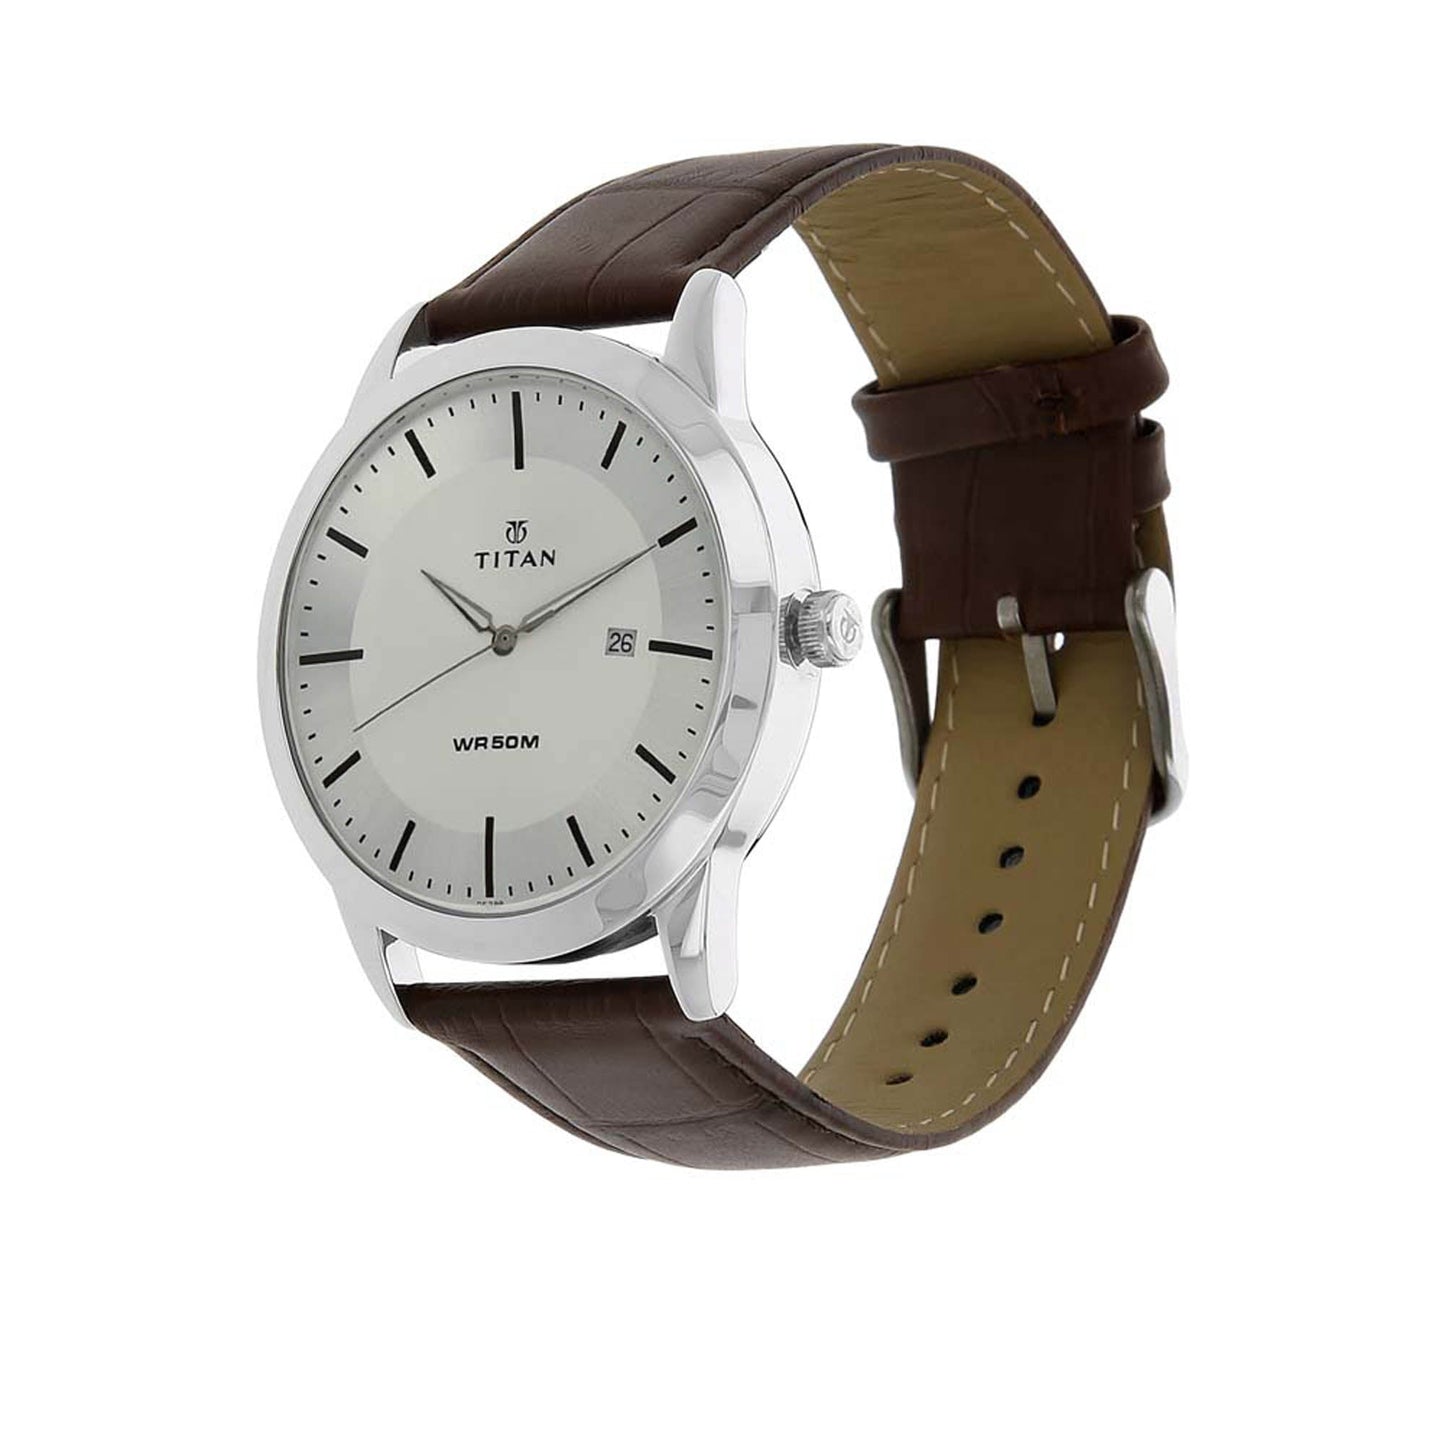 Titan Classique Silver Dial Analog with Date Leather Strap watch for Men